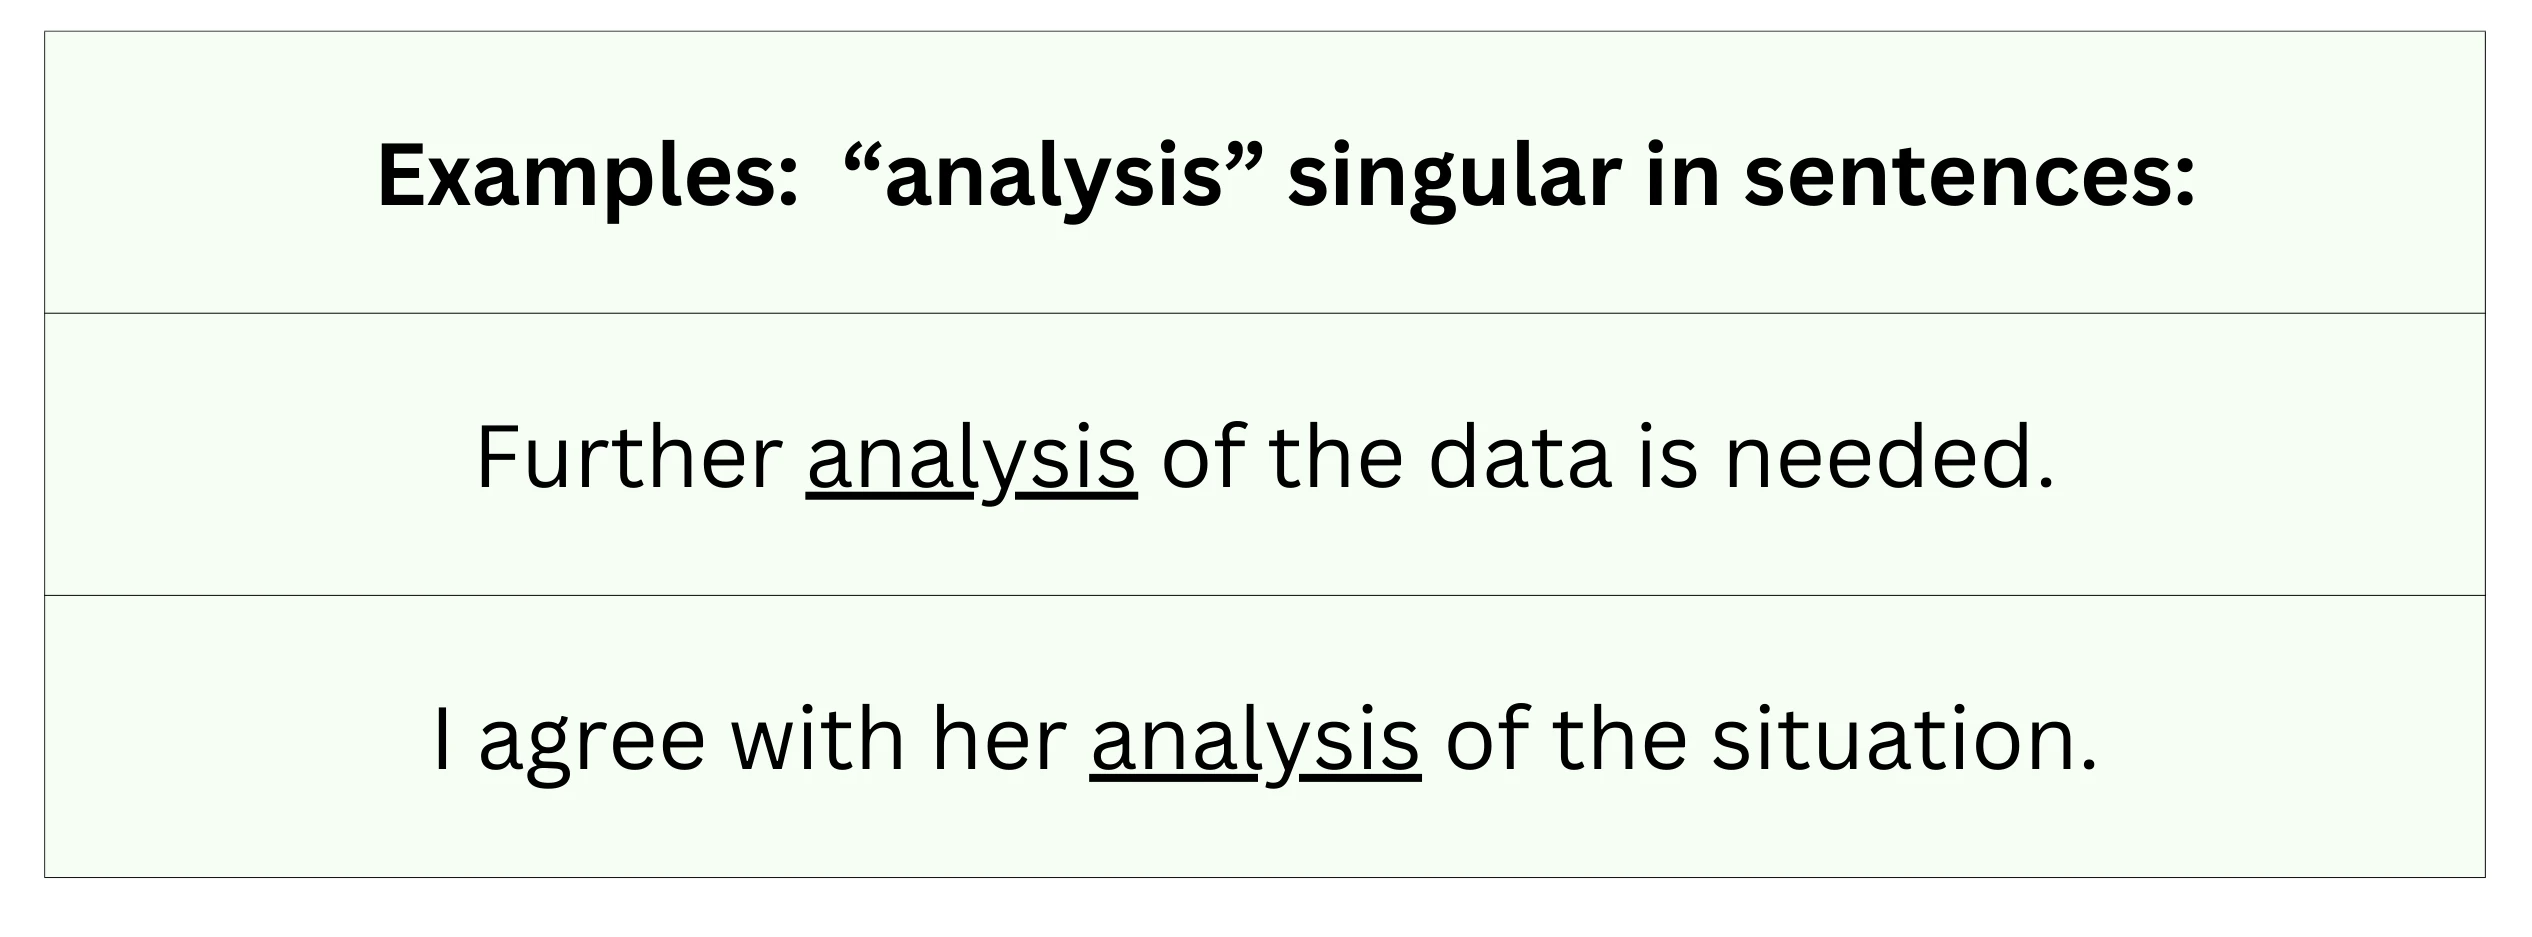 Analysis vs. Analyses: What is the Plural of Analysis?